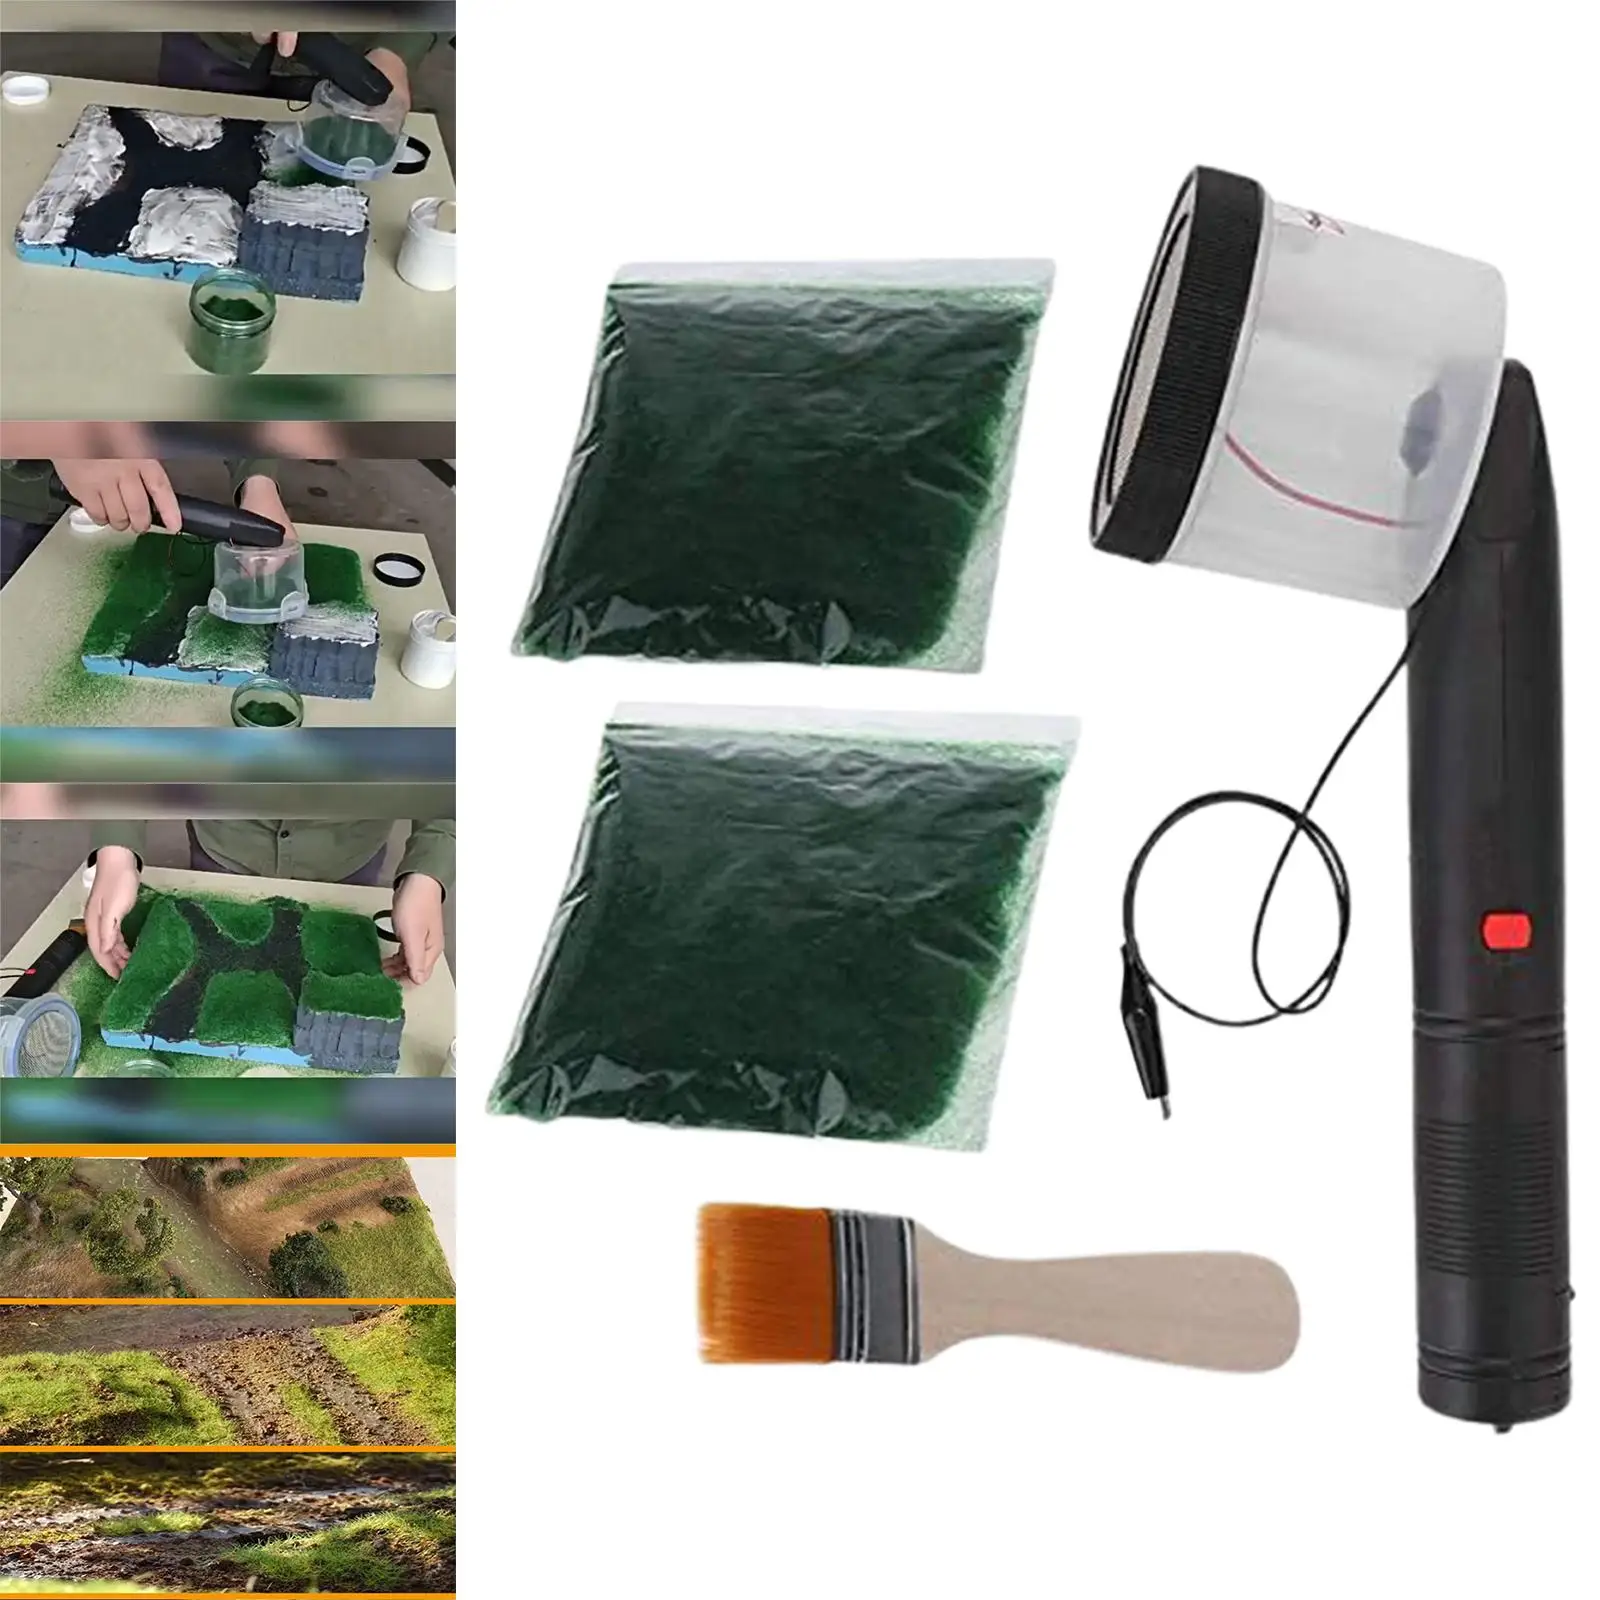 Static Grass Applicator Hobby Accessories for Street Building DIY Project